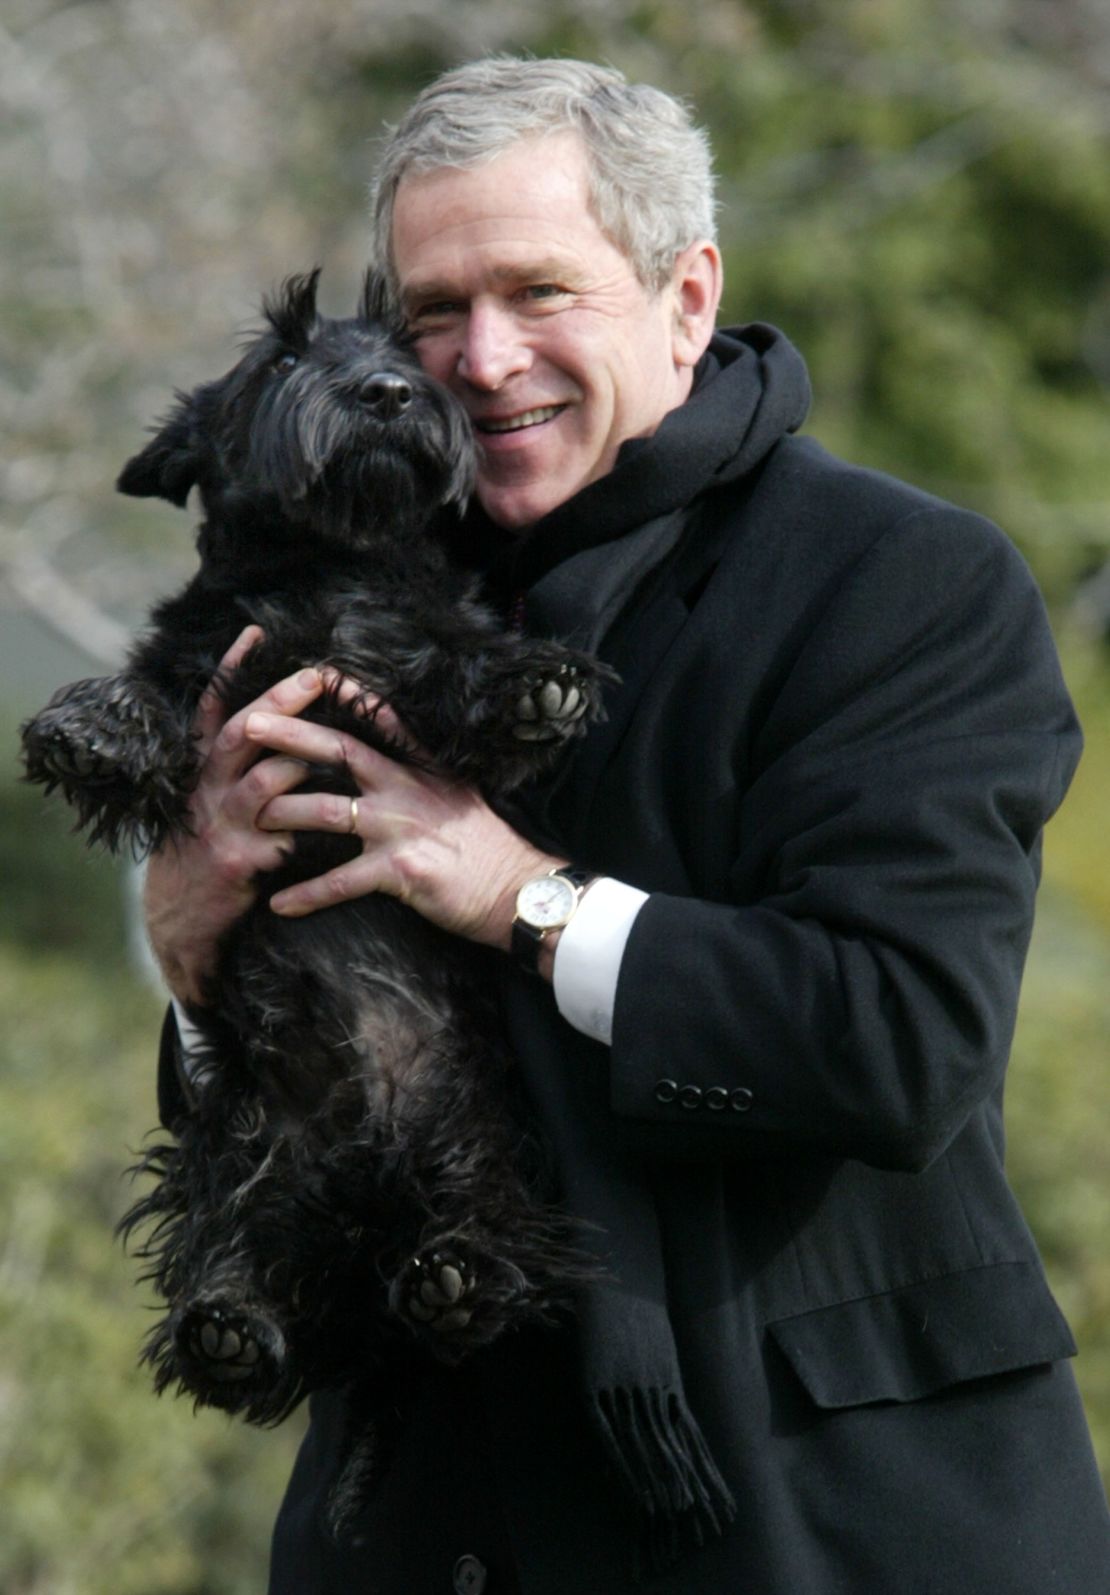 Bush holds up his dog Barney upon his arrival at the South Lawn of the White House on February 3, 2002.